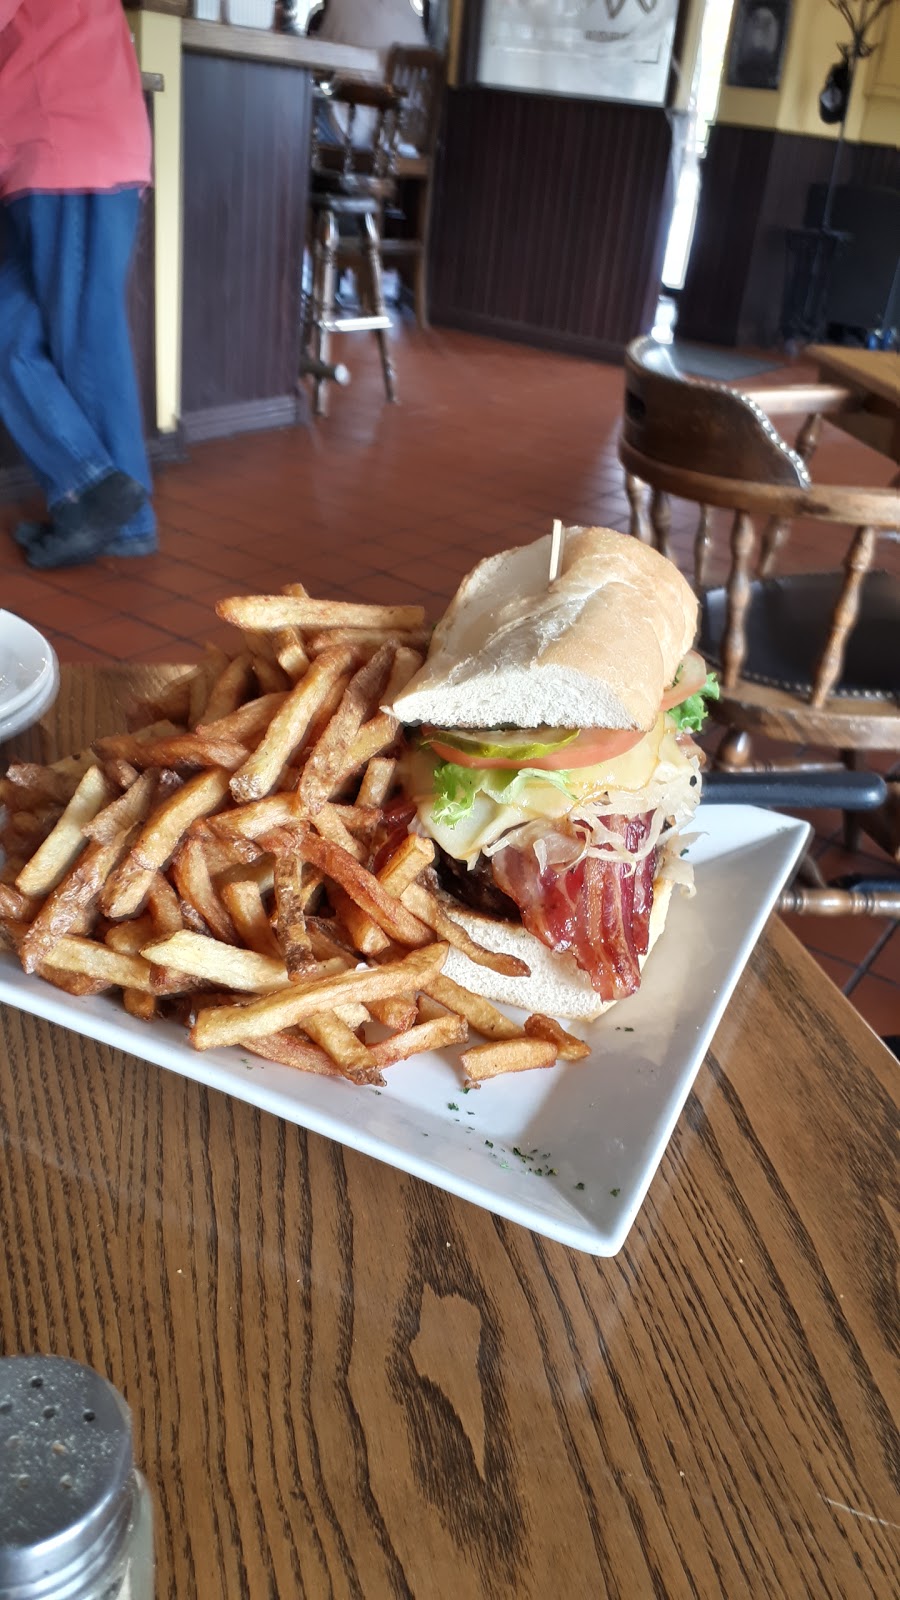 The Docks Restaurant and Bar | 76559 ON-21, Bayfield, ON N0M 1G0, Canada | Phone: (519) 565-4455